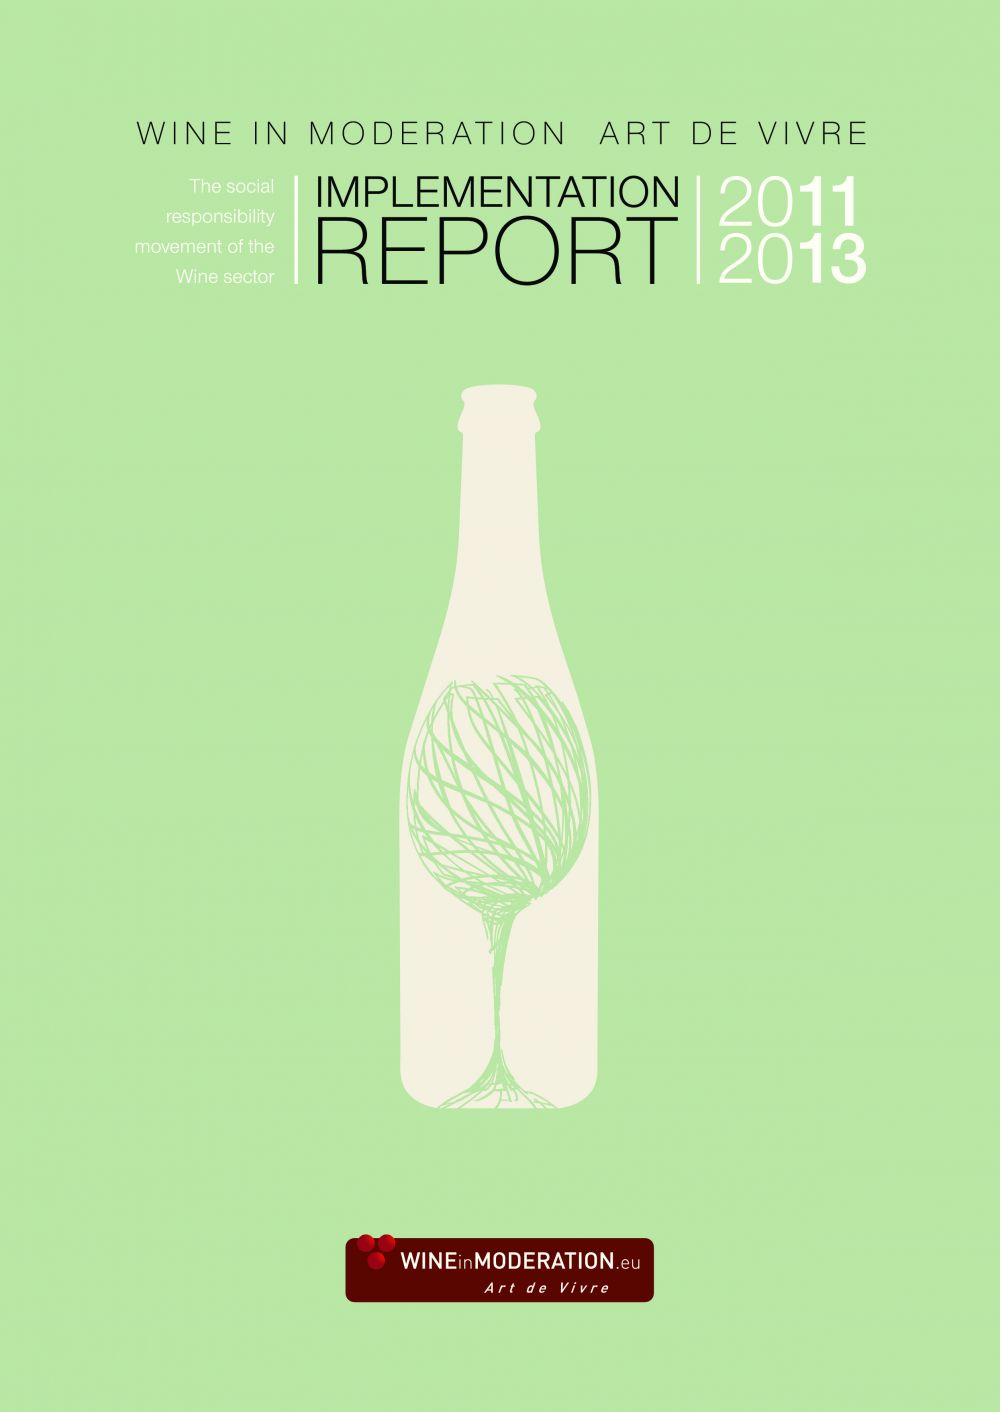 The Wine in Moderation implementation report 2011-2013 is now ready and available online!